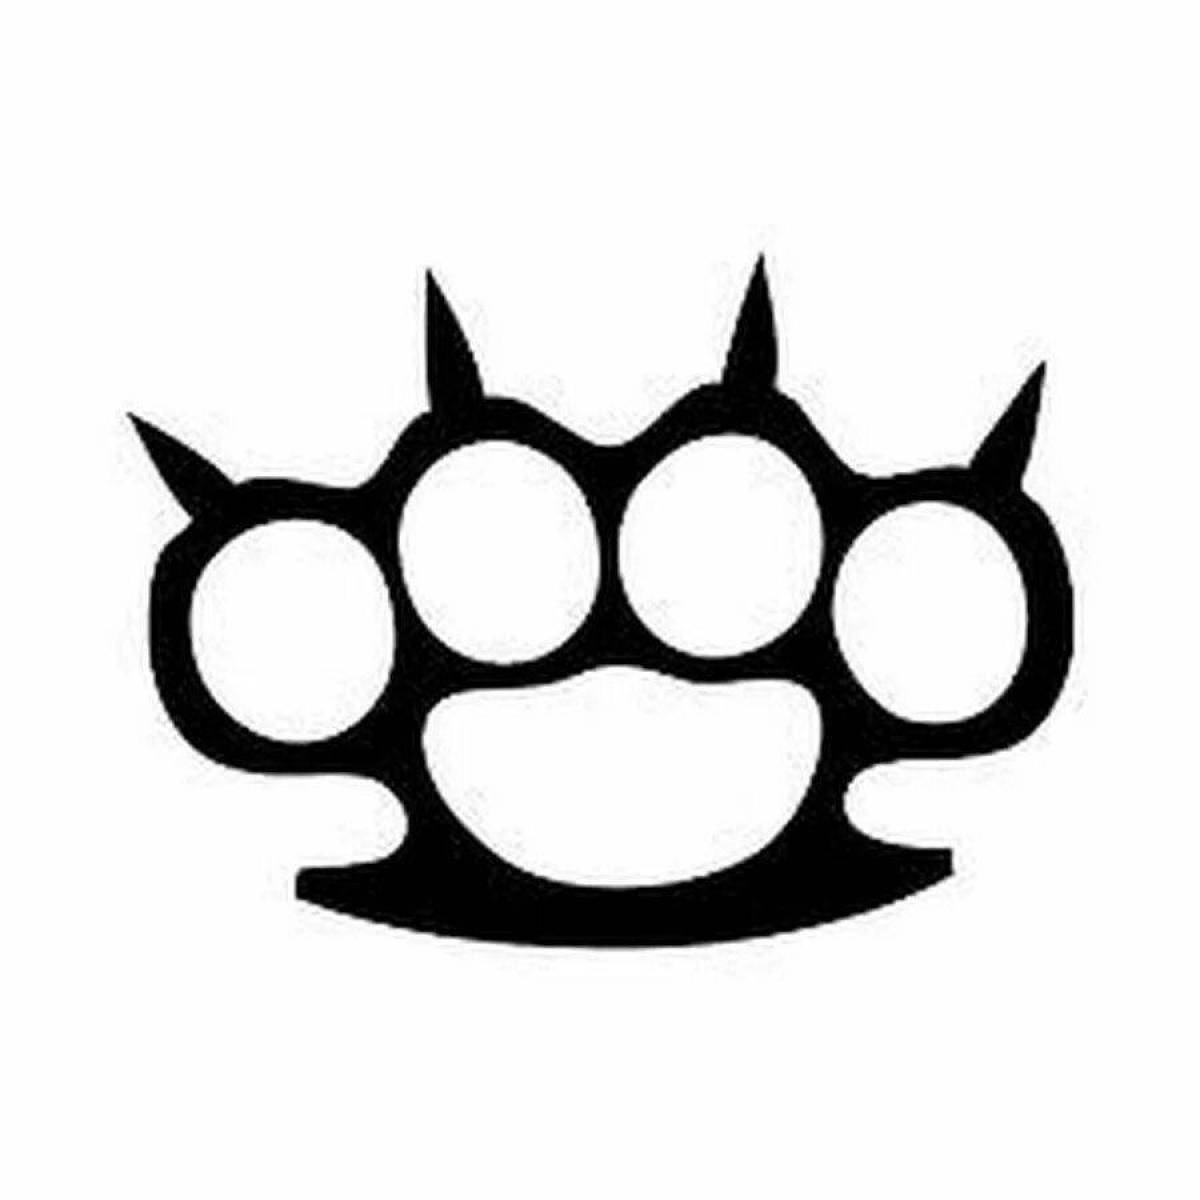 Inviting brass knuckles coloring page